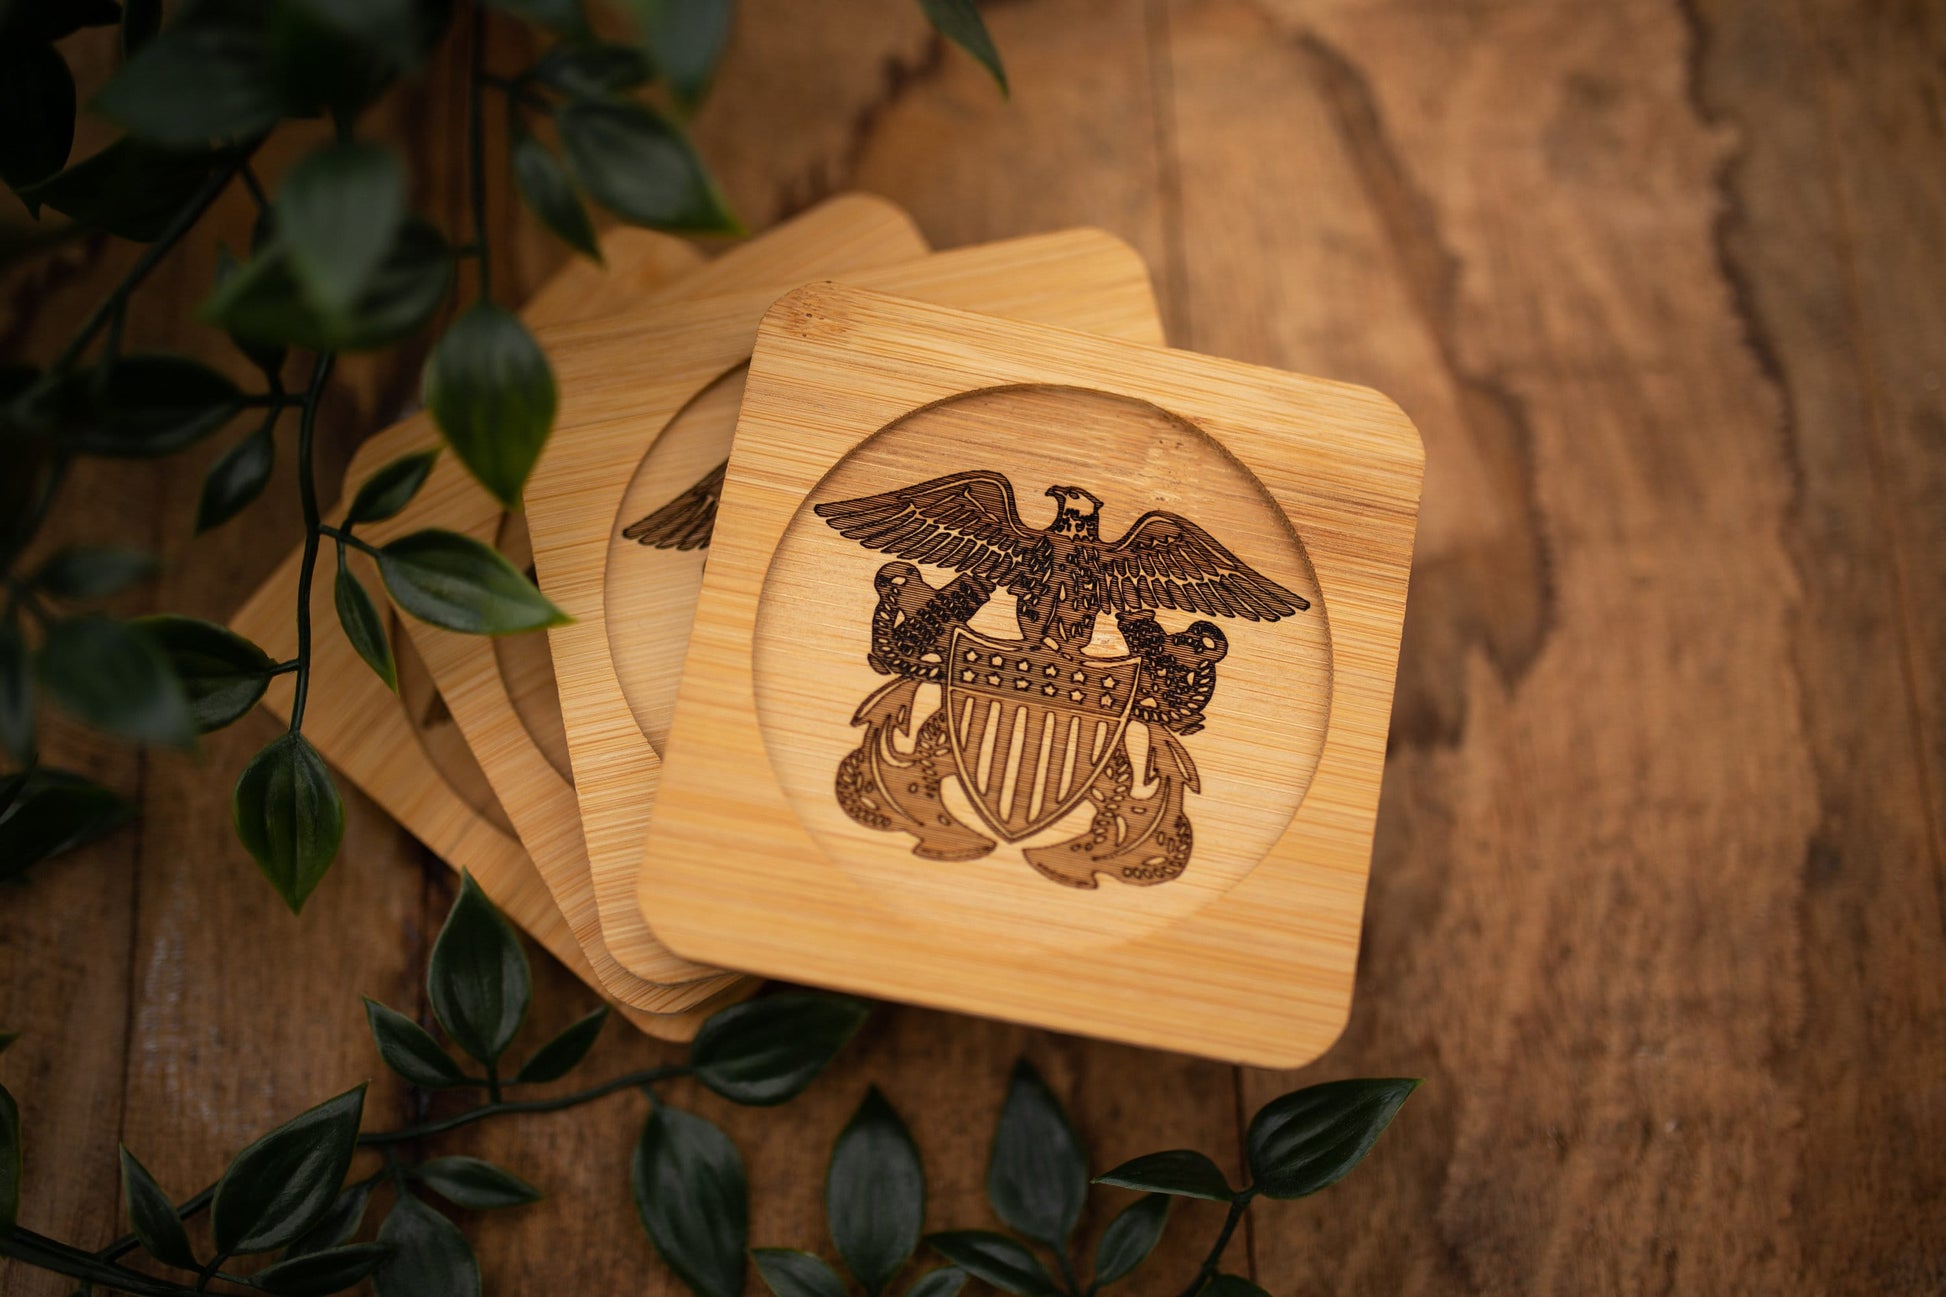 Navy Officer Crest Laser Engraved Bamboo Coasters!  Set of 4, great gift for commissioning or special occasions